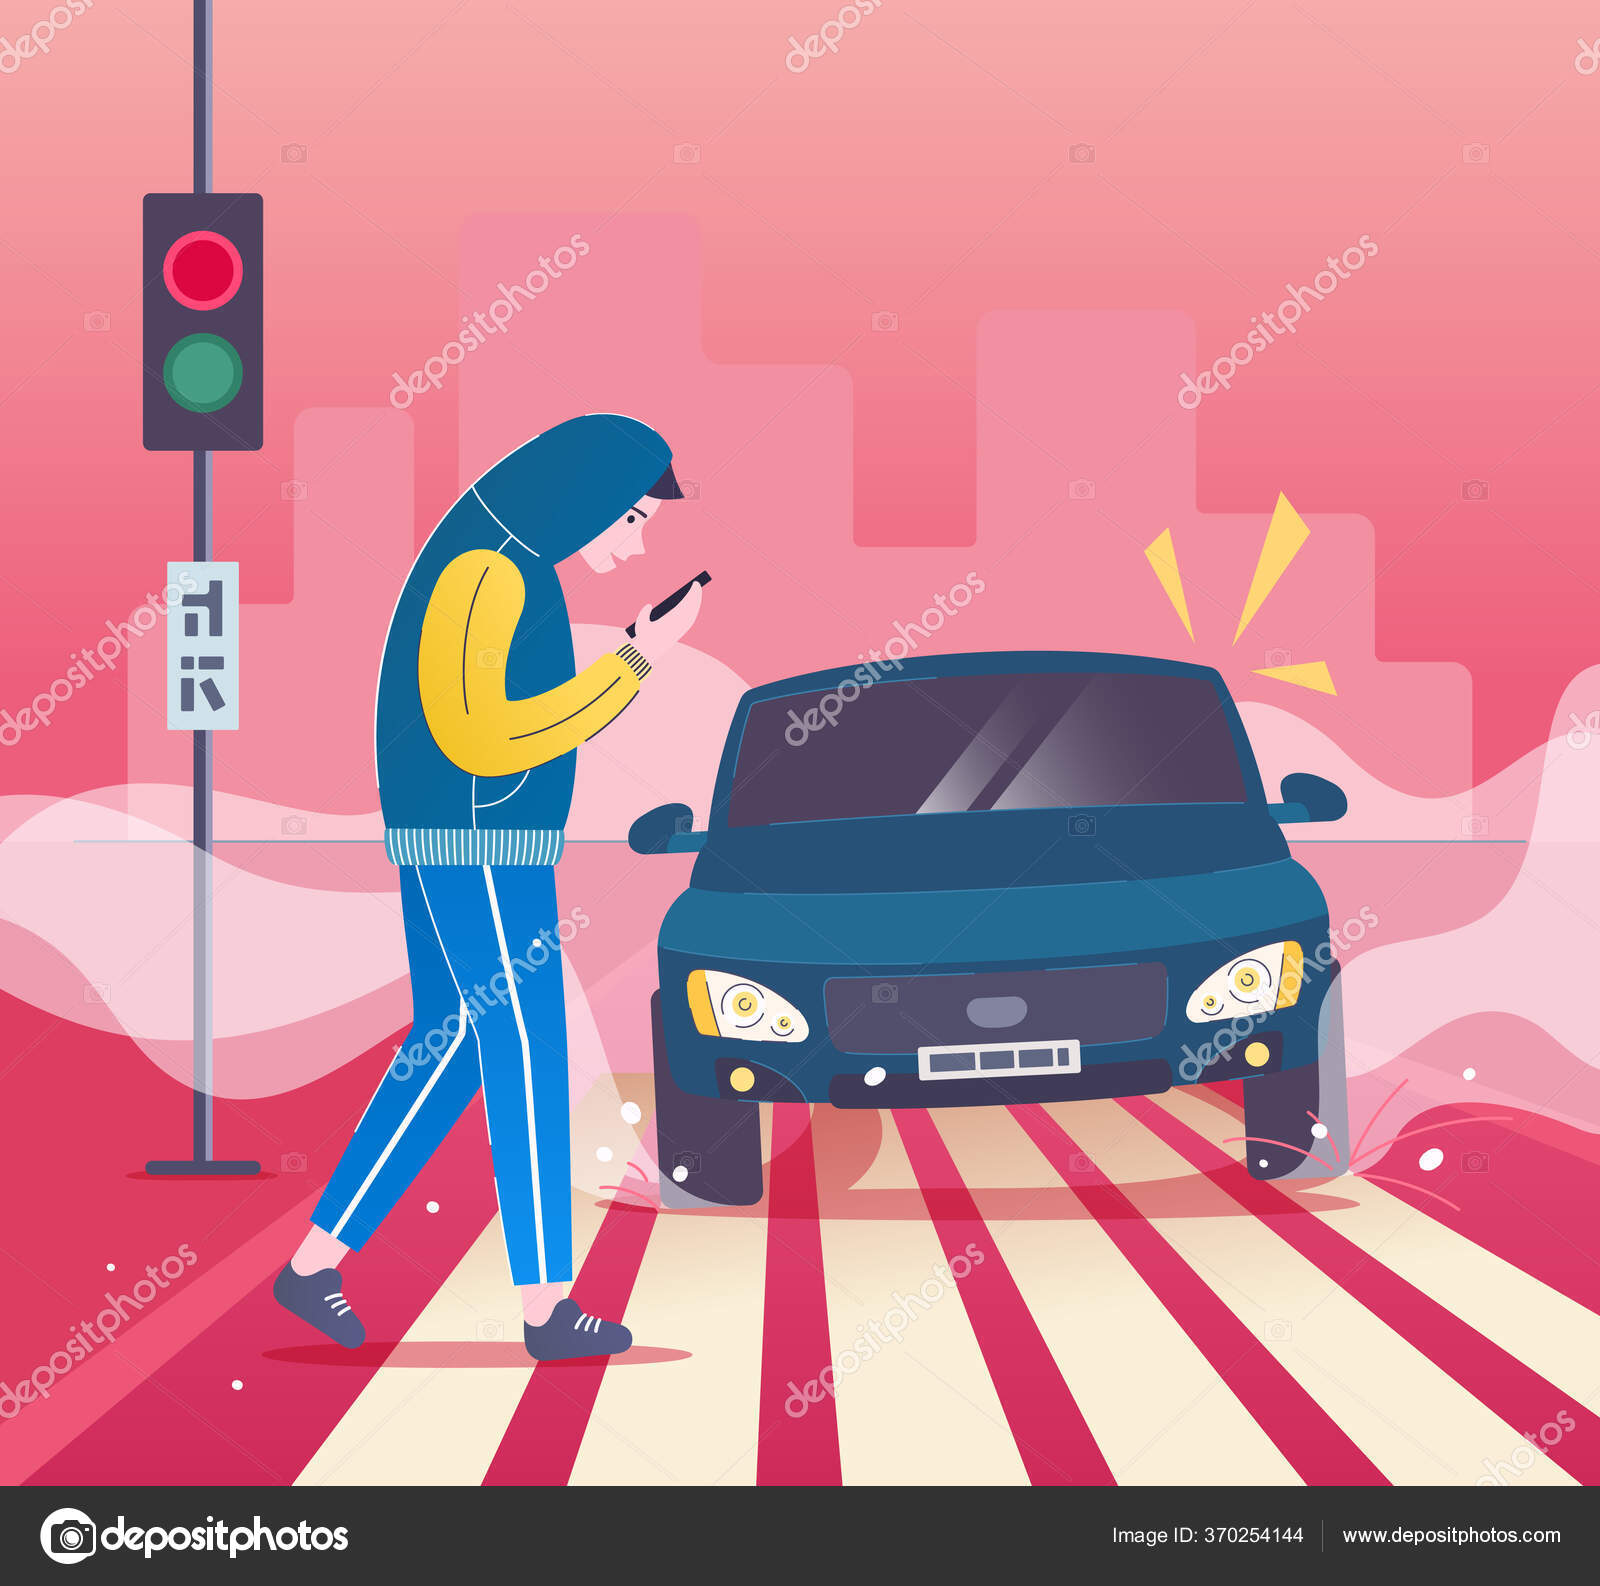 Pedestrian accident - Vector illustration. Man with smartphone on ...